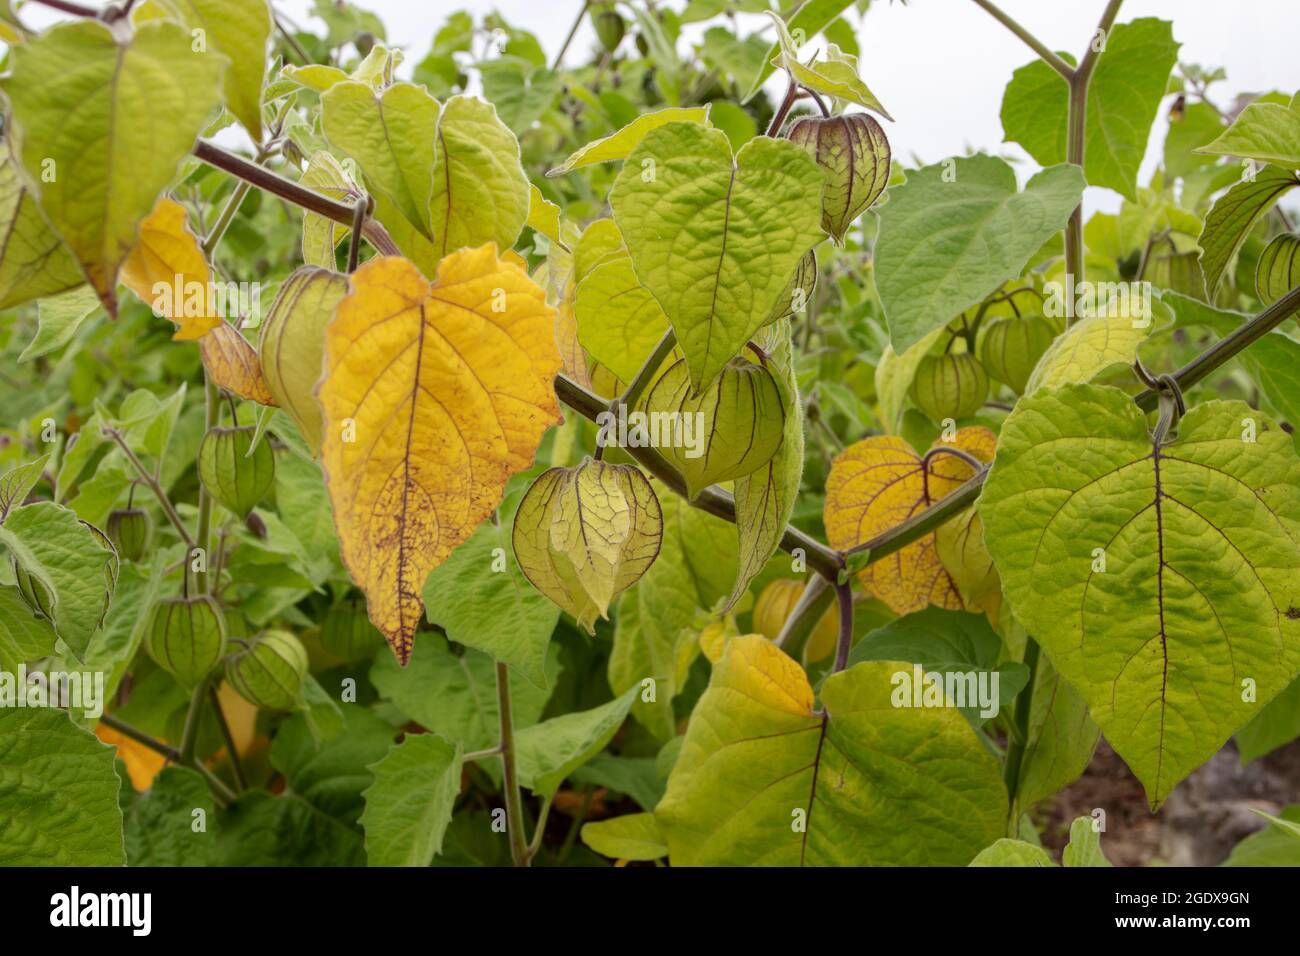 Cape gooseberry or goldenberry or Physalis peruviana plants with hairy leaves and immature fruits in green calyx Stock Photo